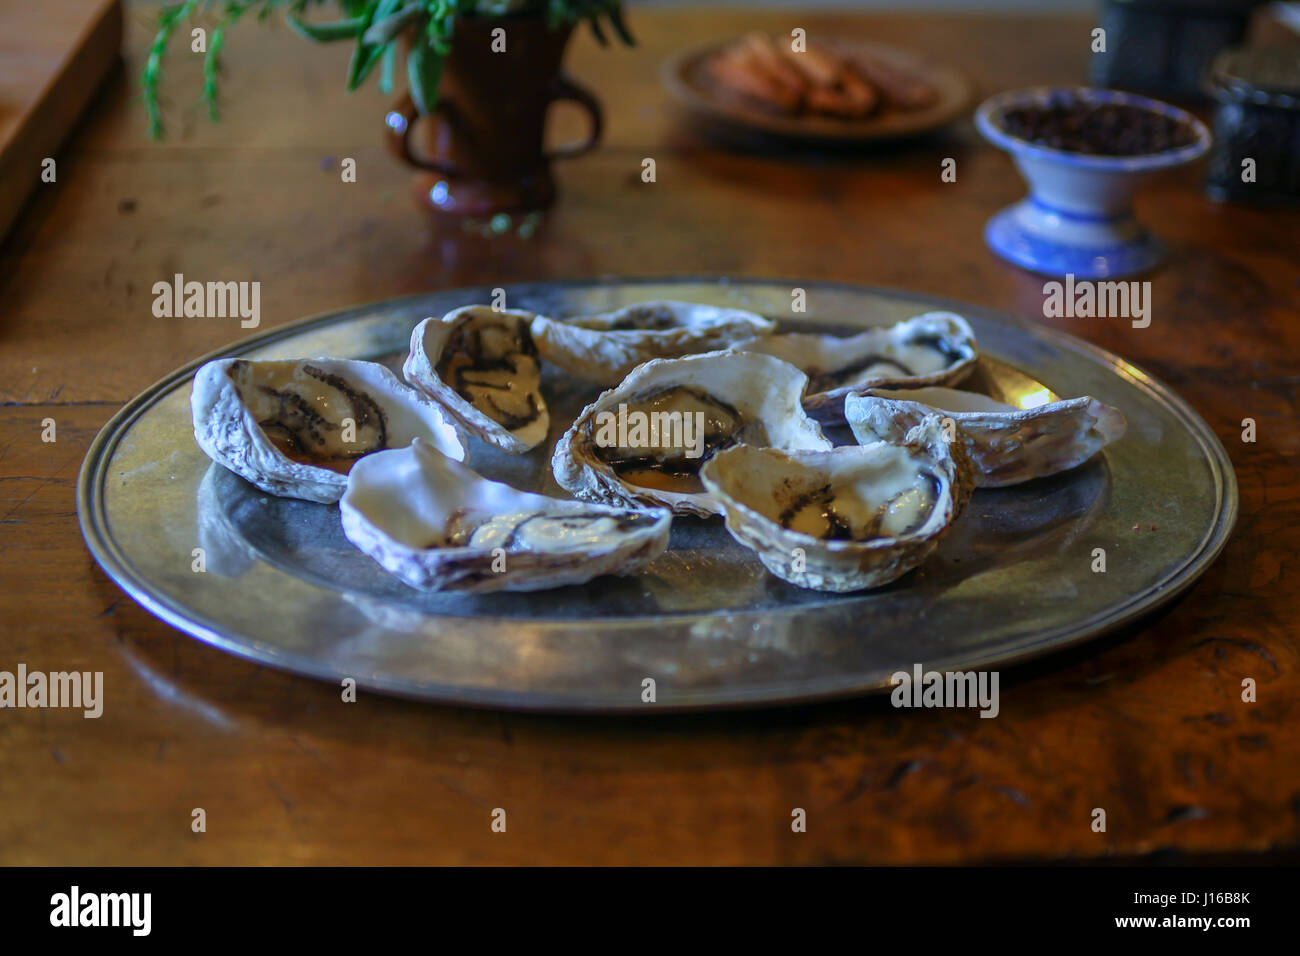 Oysters on a plate on the table Stock Photo